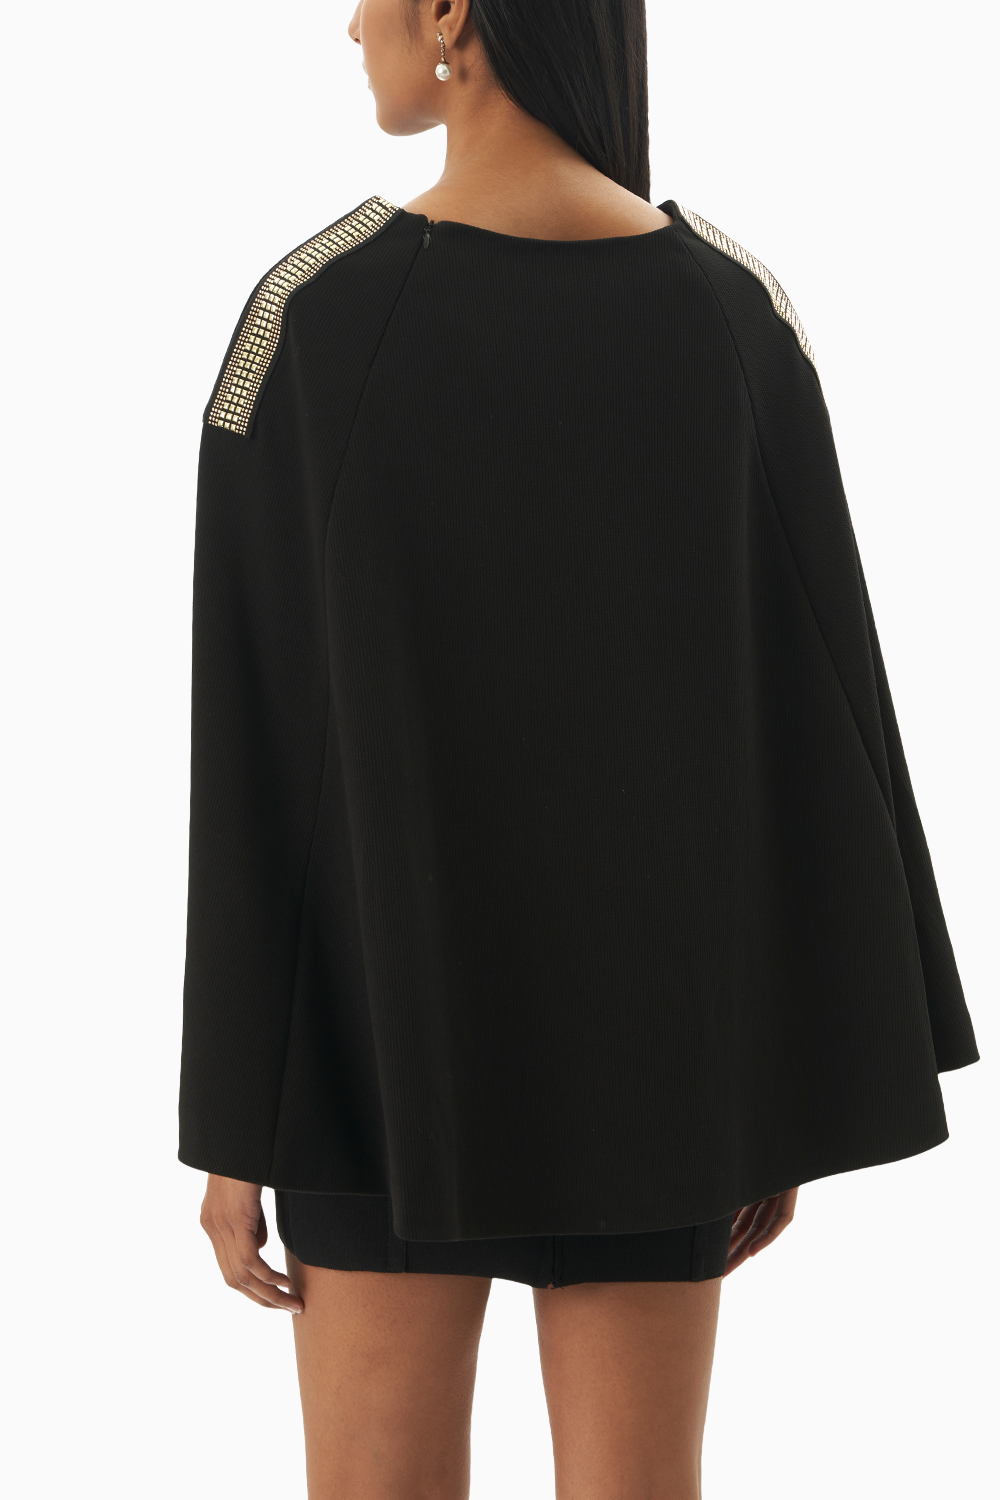 The Rosewood Cape